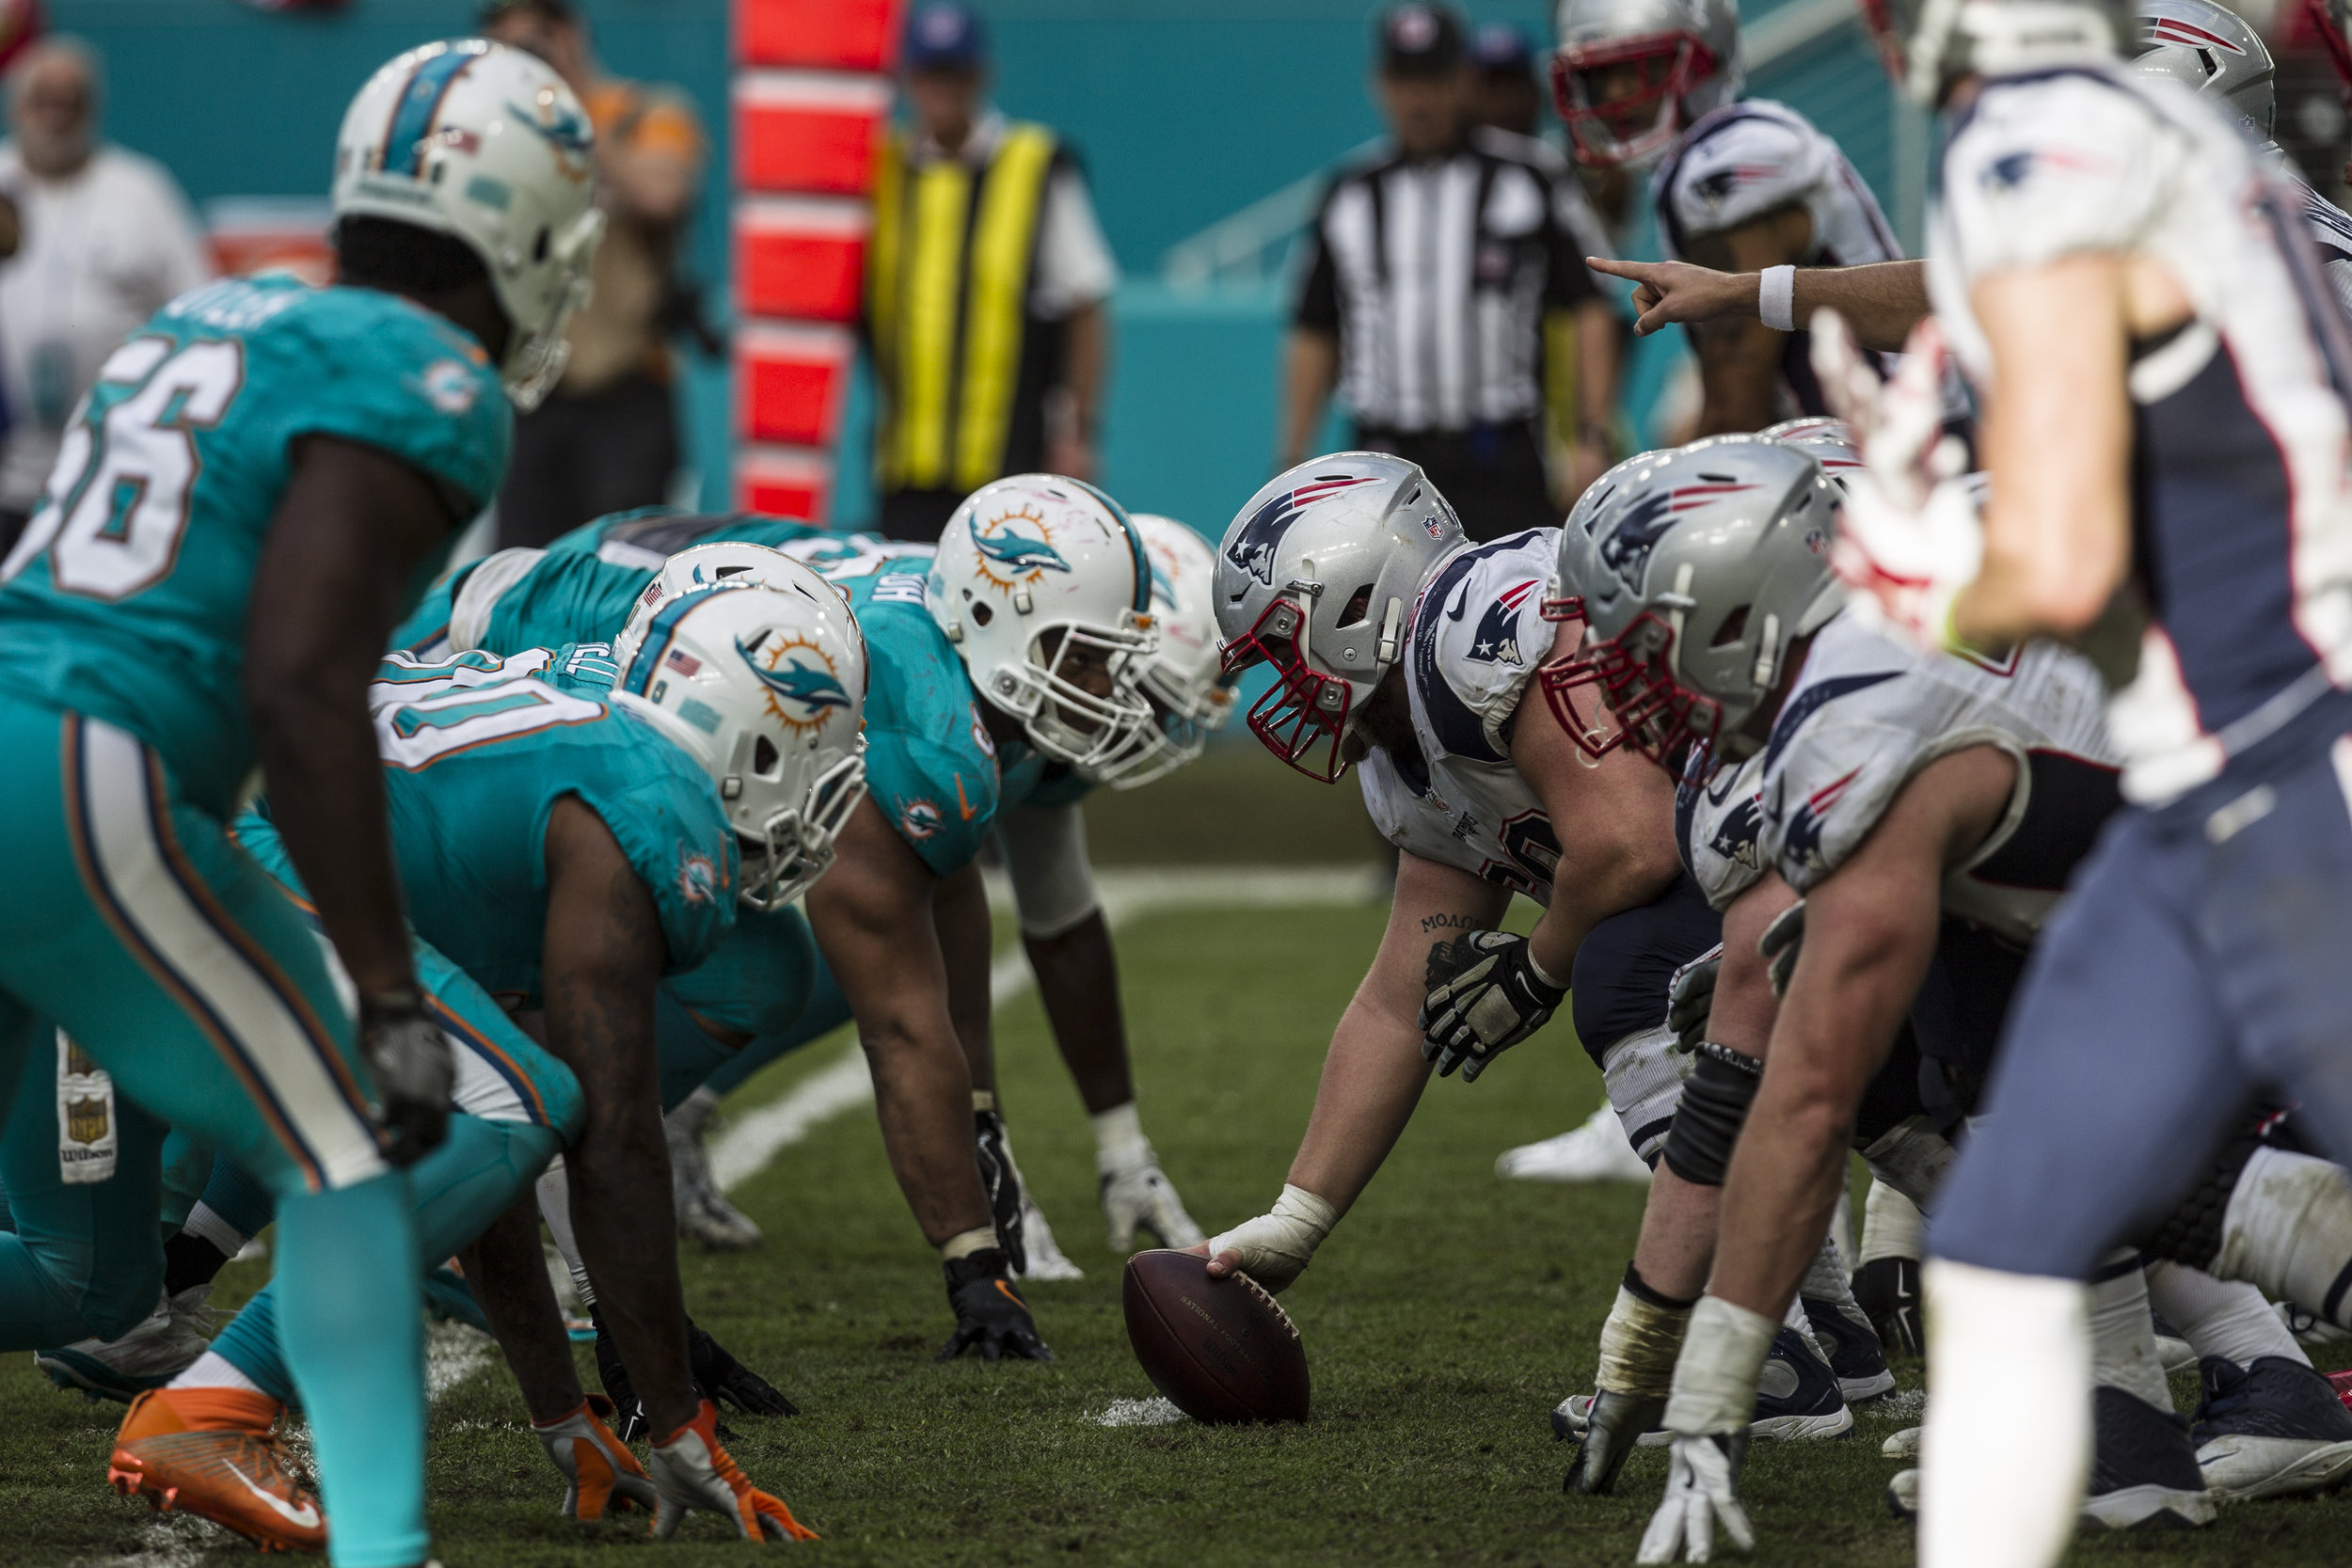  The Miami Dolphins hosted the New England Patriots at Hard Rock Stadium in Miami Gardens, Florida, &nbsp;on January 1, 2017. 